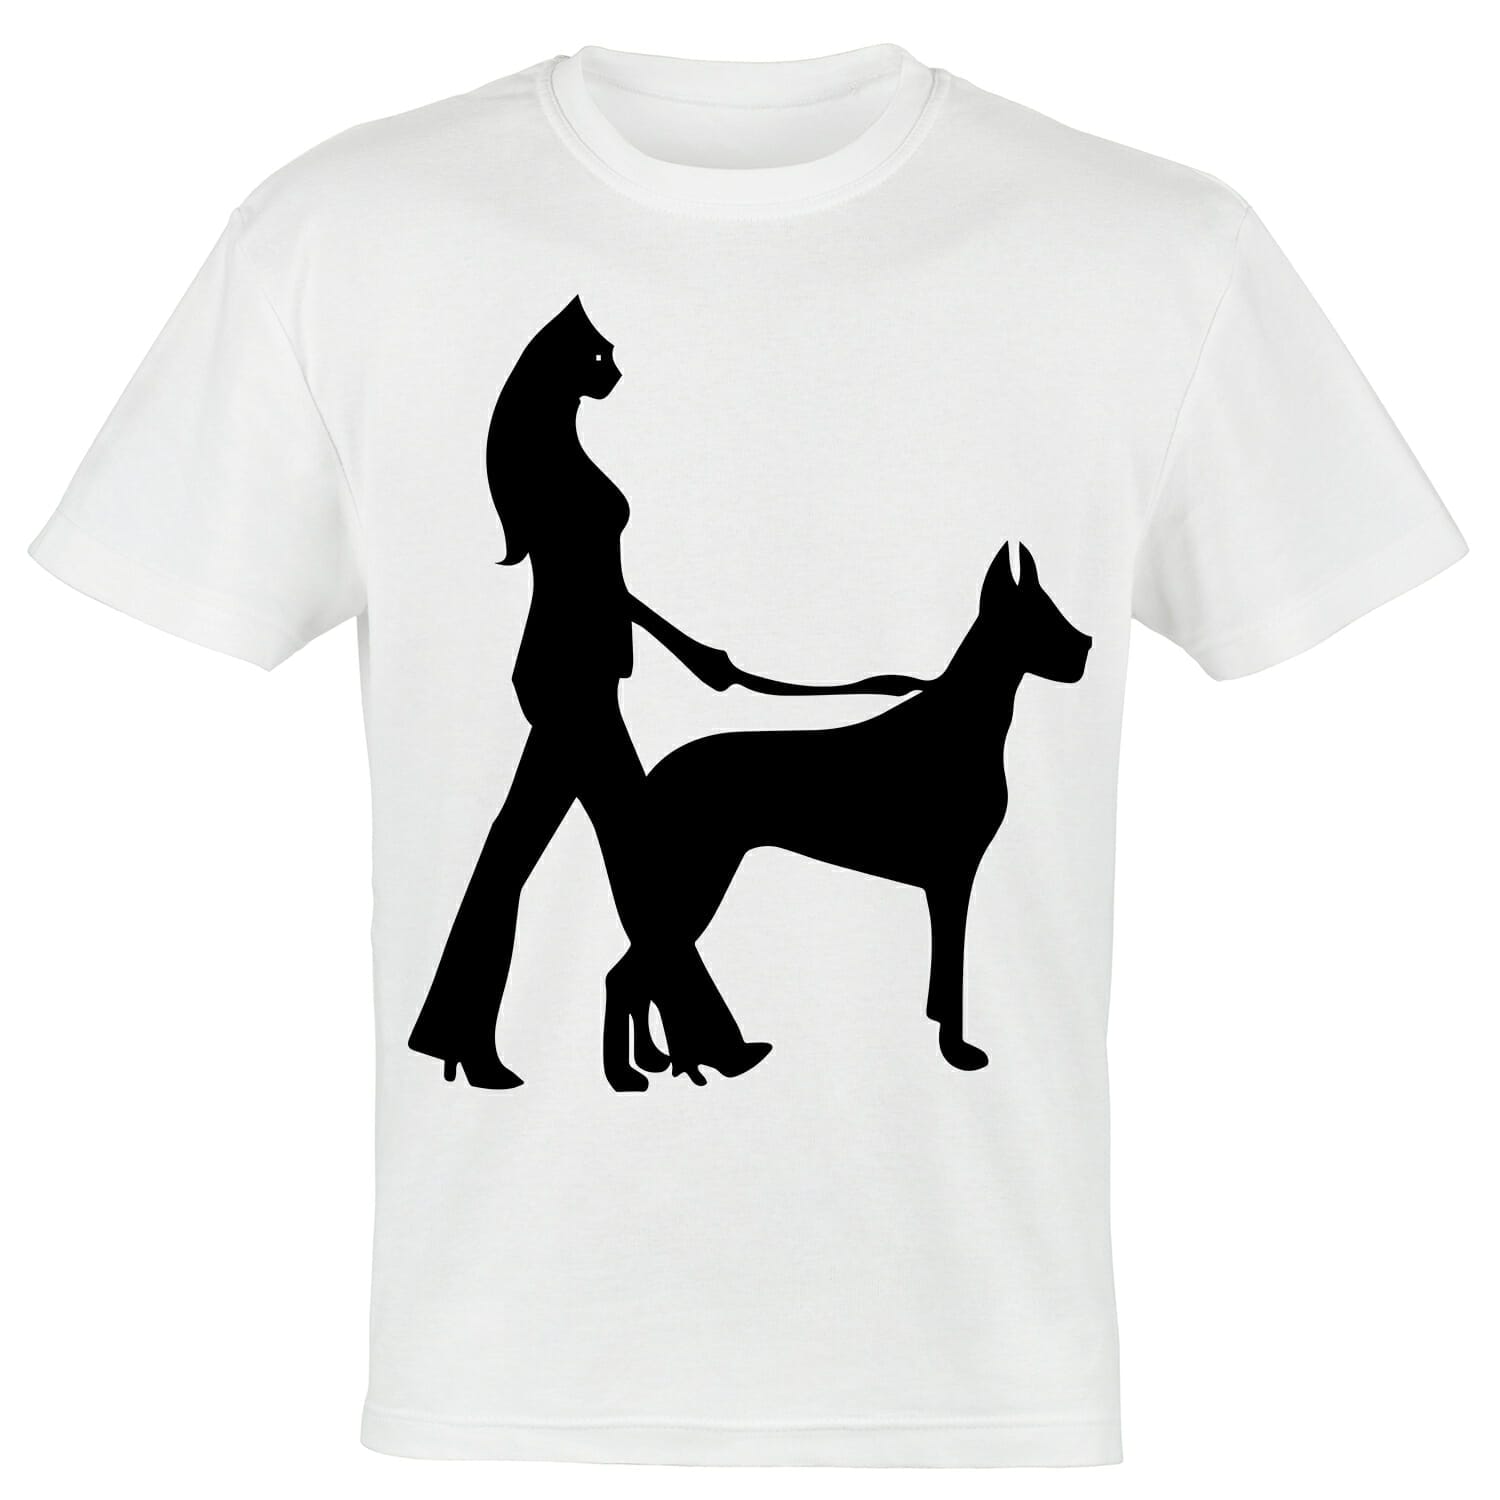 Catwoman with a dog tshirt design